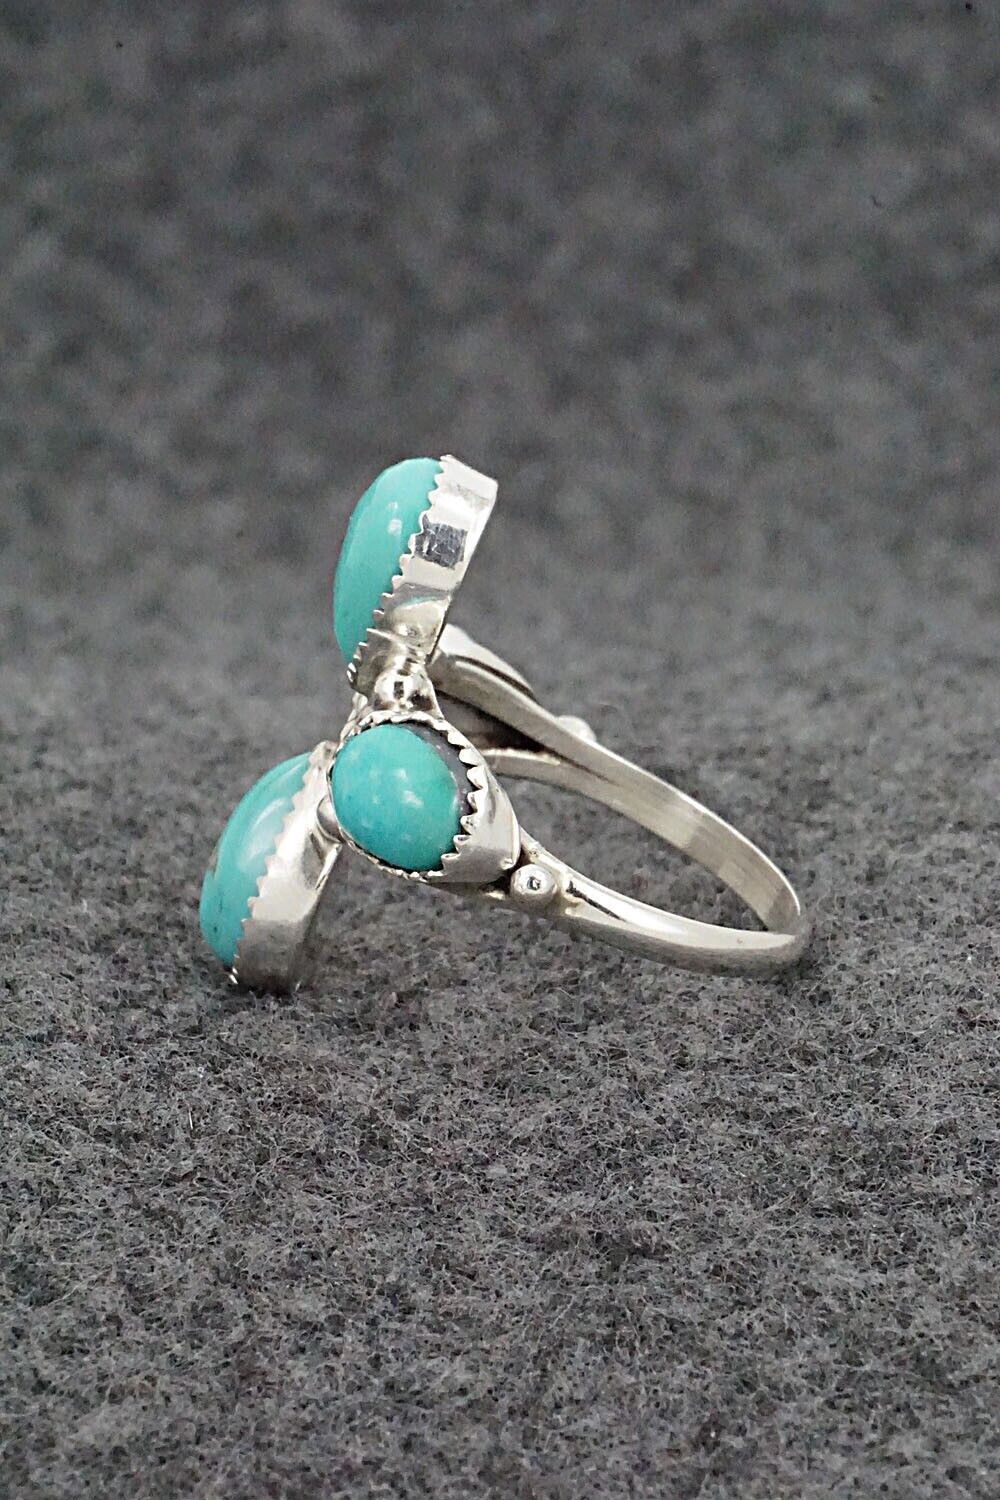 Turquoise & Sterling Silver Ring - Maritta Martinez - Size 8.5